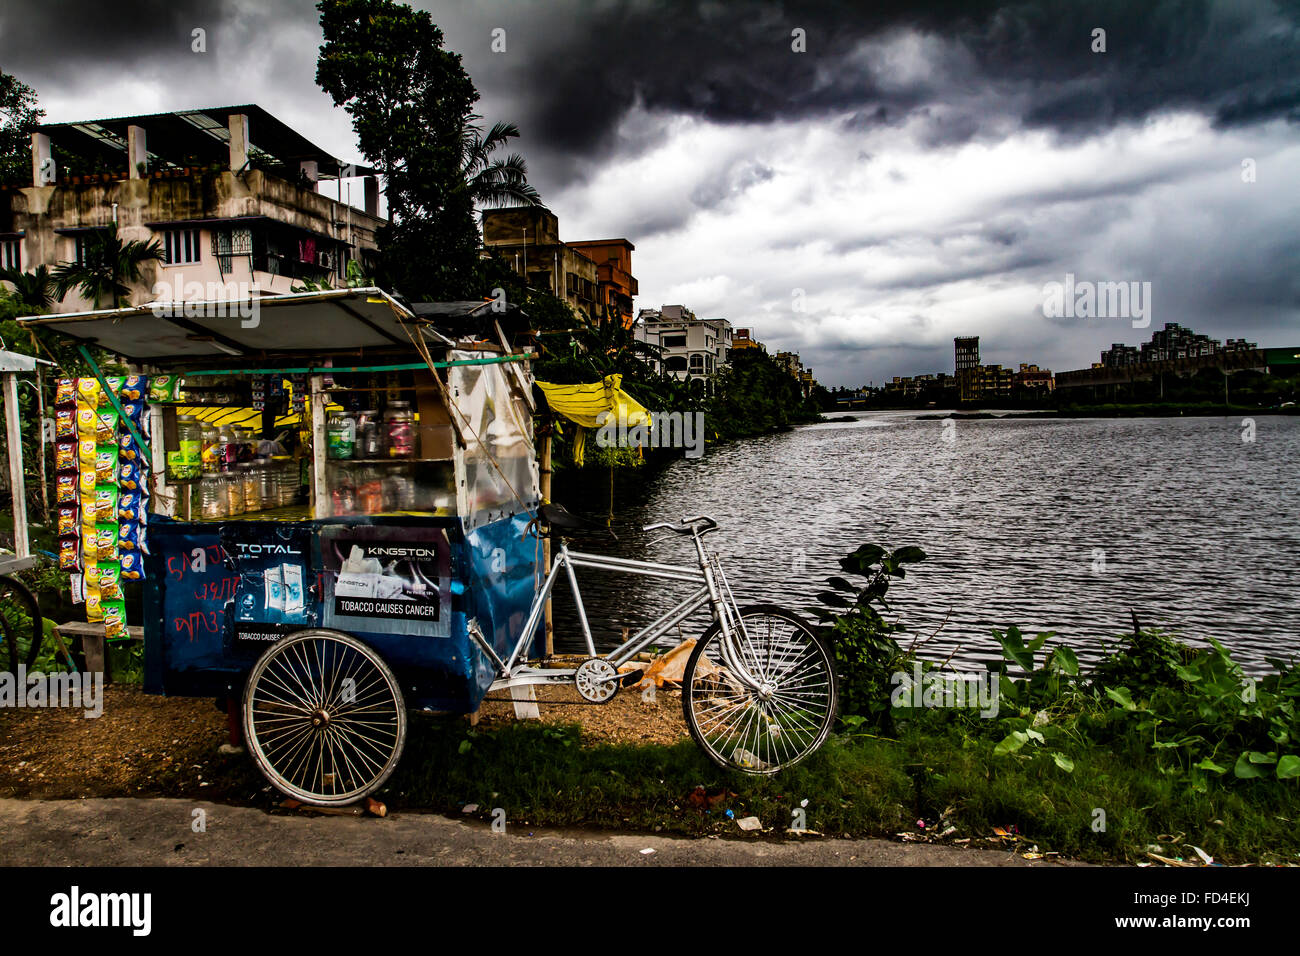 At the height of the Indian monsoon, a single Paan wallah cycle is set against a thunderous backdrop in Garia, Kolkata Stock Photo